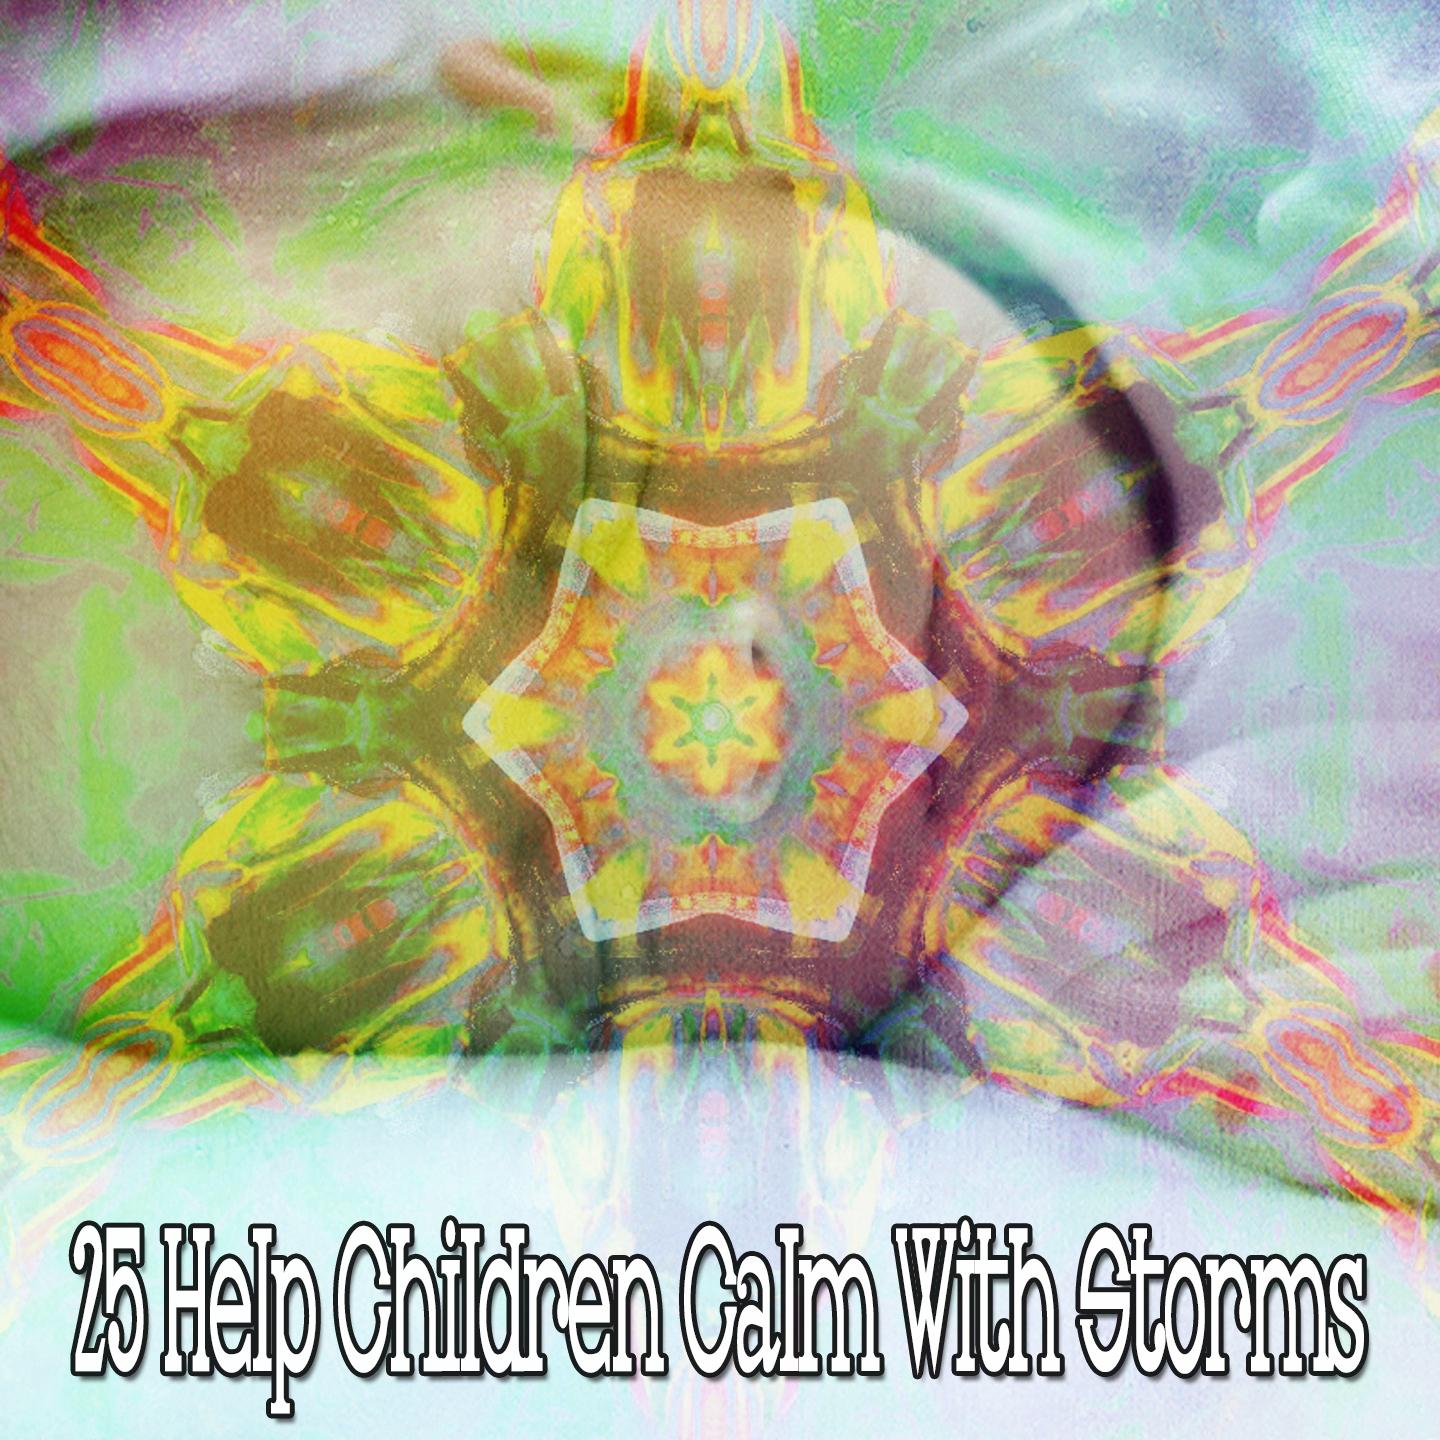 25 Help Children Calm with Storms